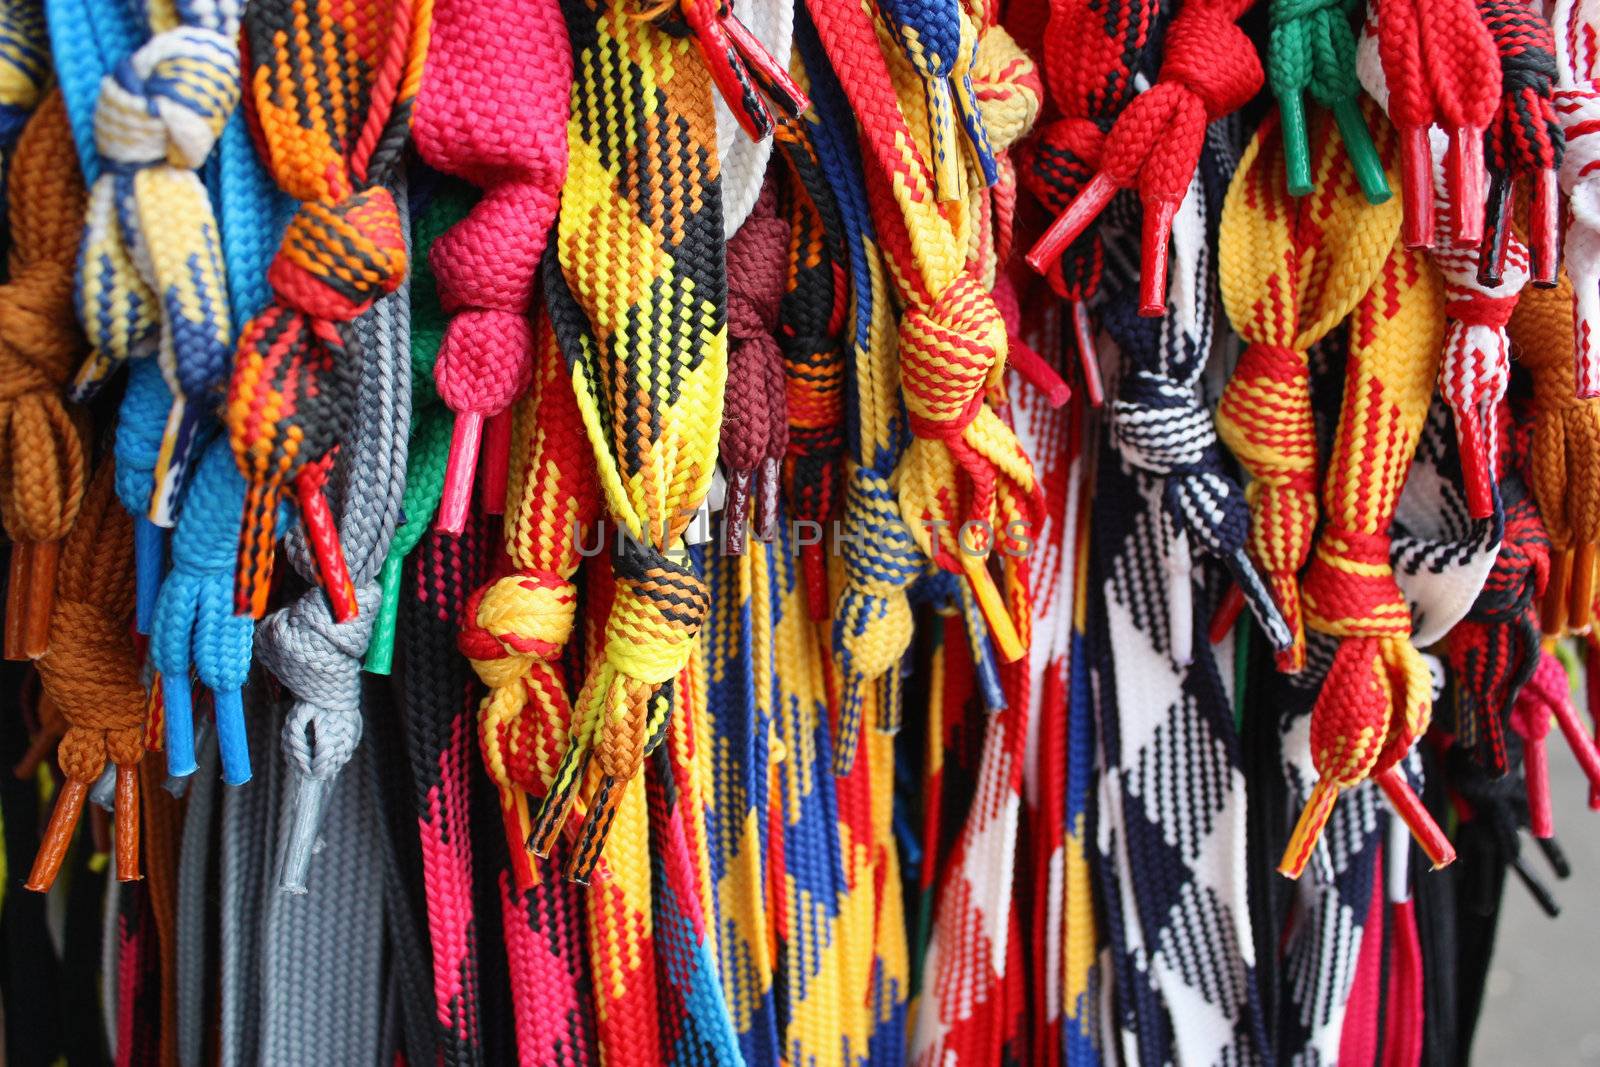 A lot of color shoelaces for footwear